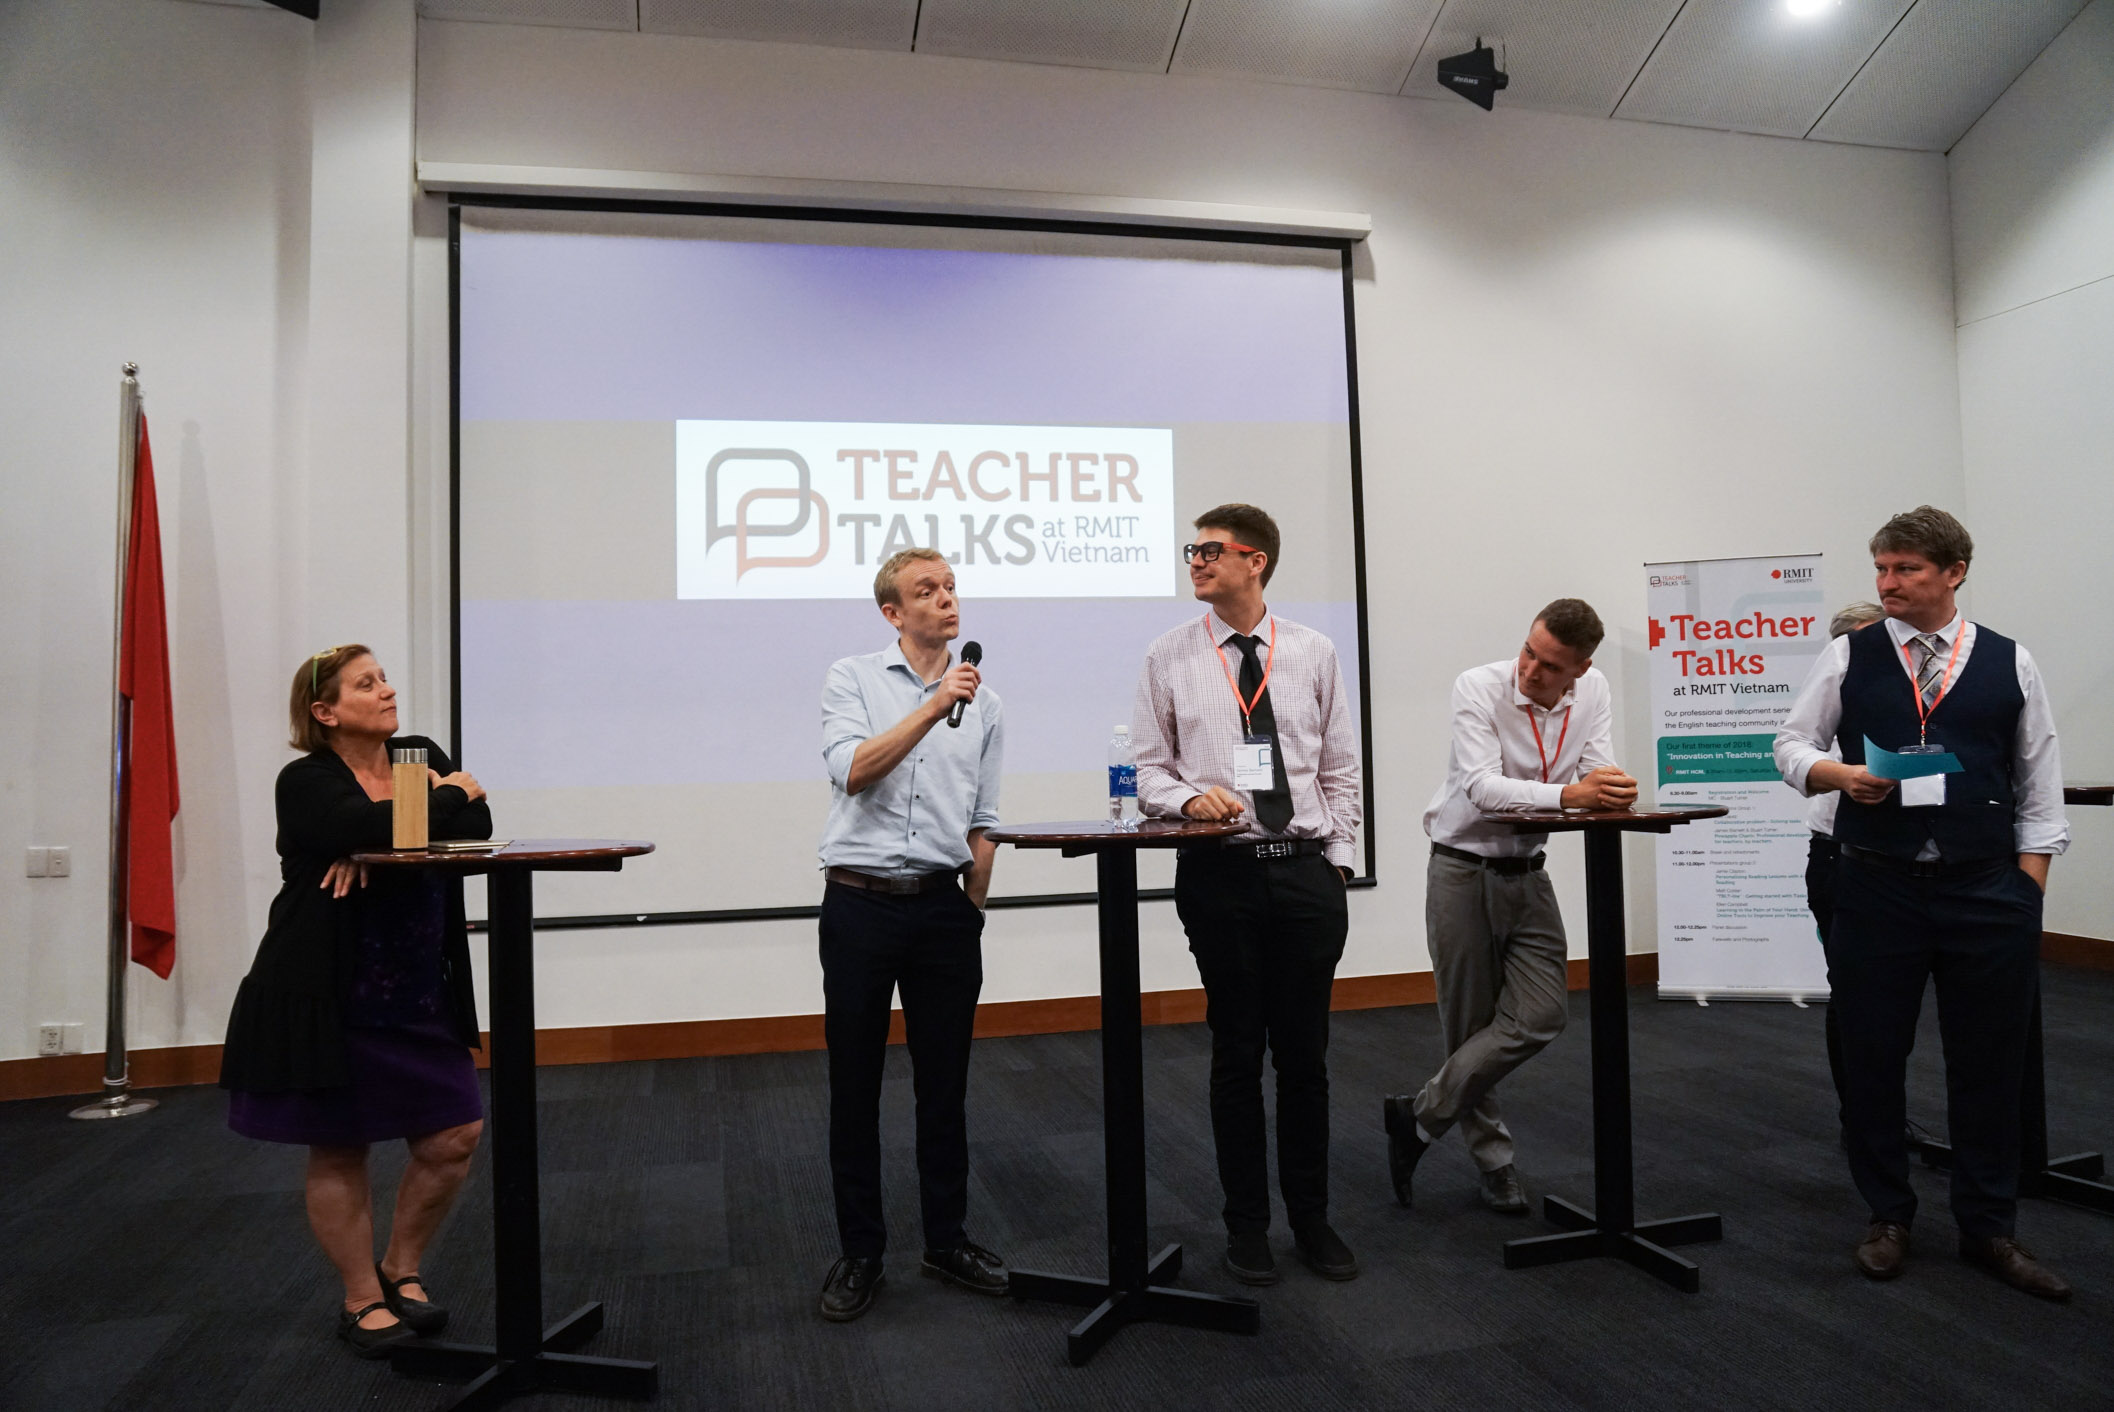 During the first Teacher Talks at RMIT Vietnam’s Saigon South campus, presenters shared ways to utilise new approaches to enhance teaching and the student experience.